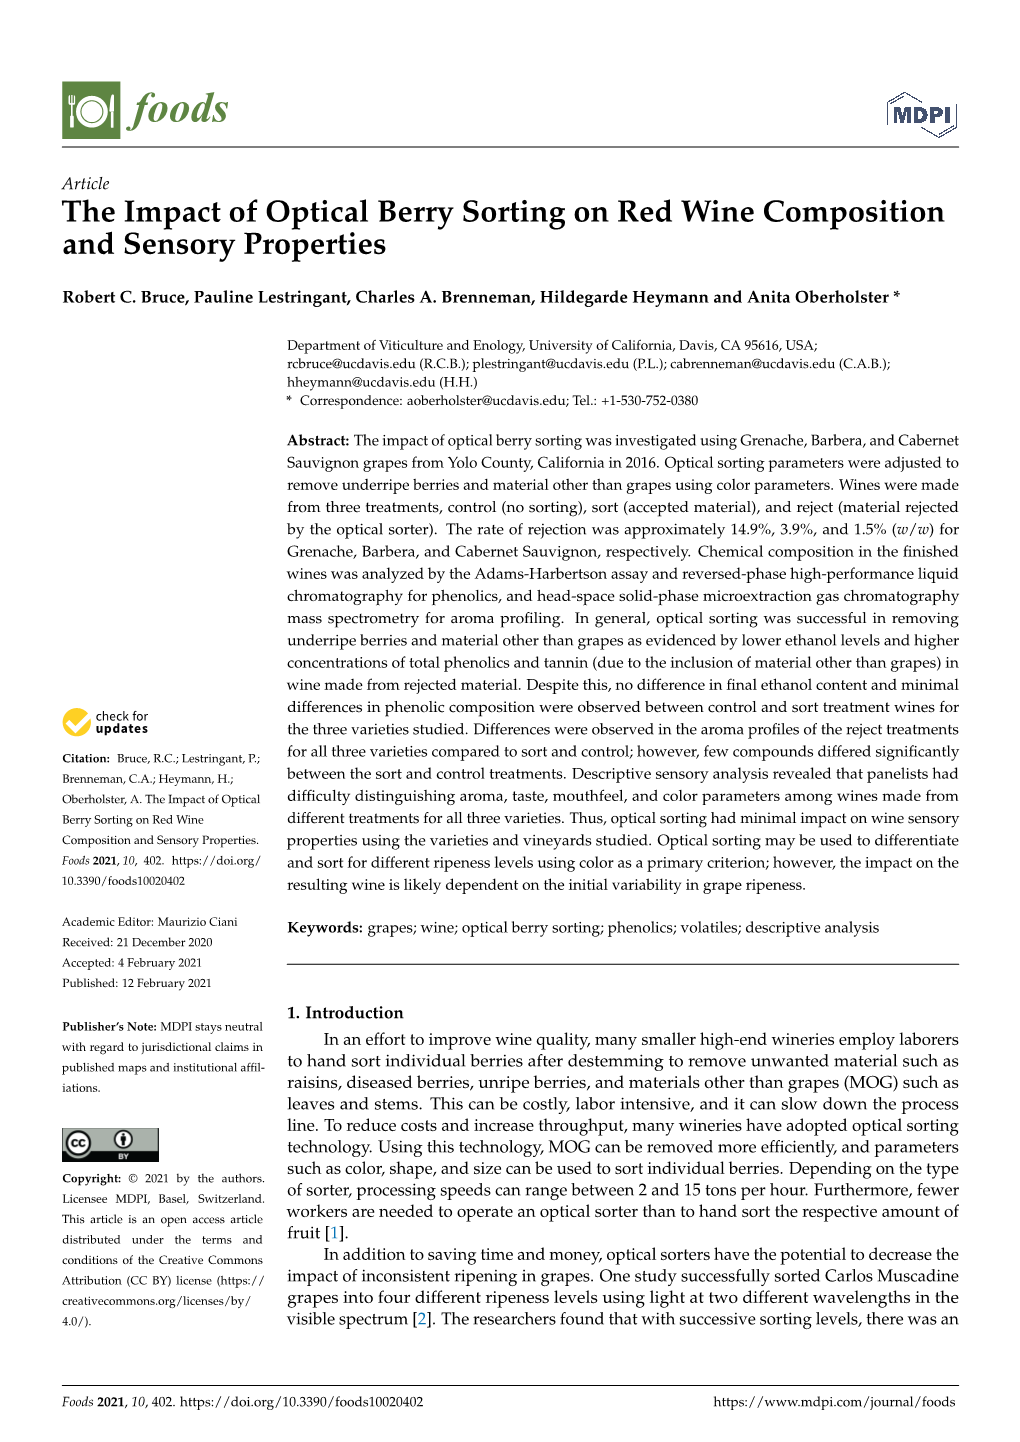 The Impact of Optical Berry Sorting on Red Wine Composition and Sensory Properties